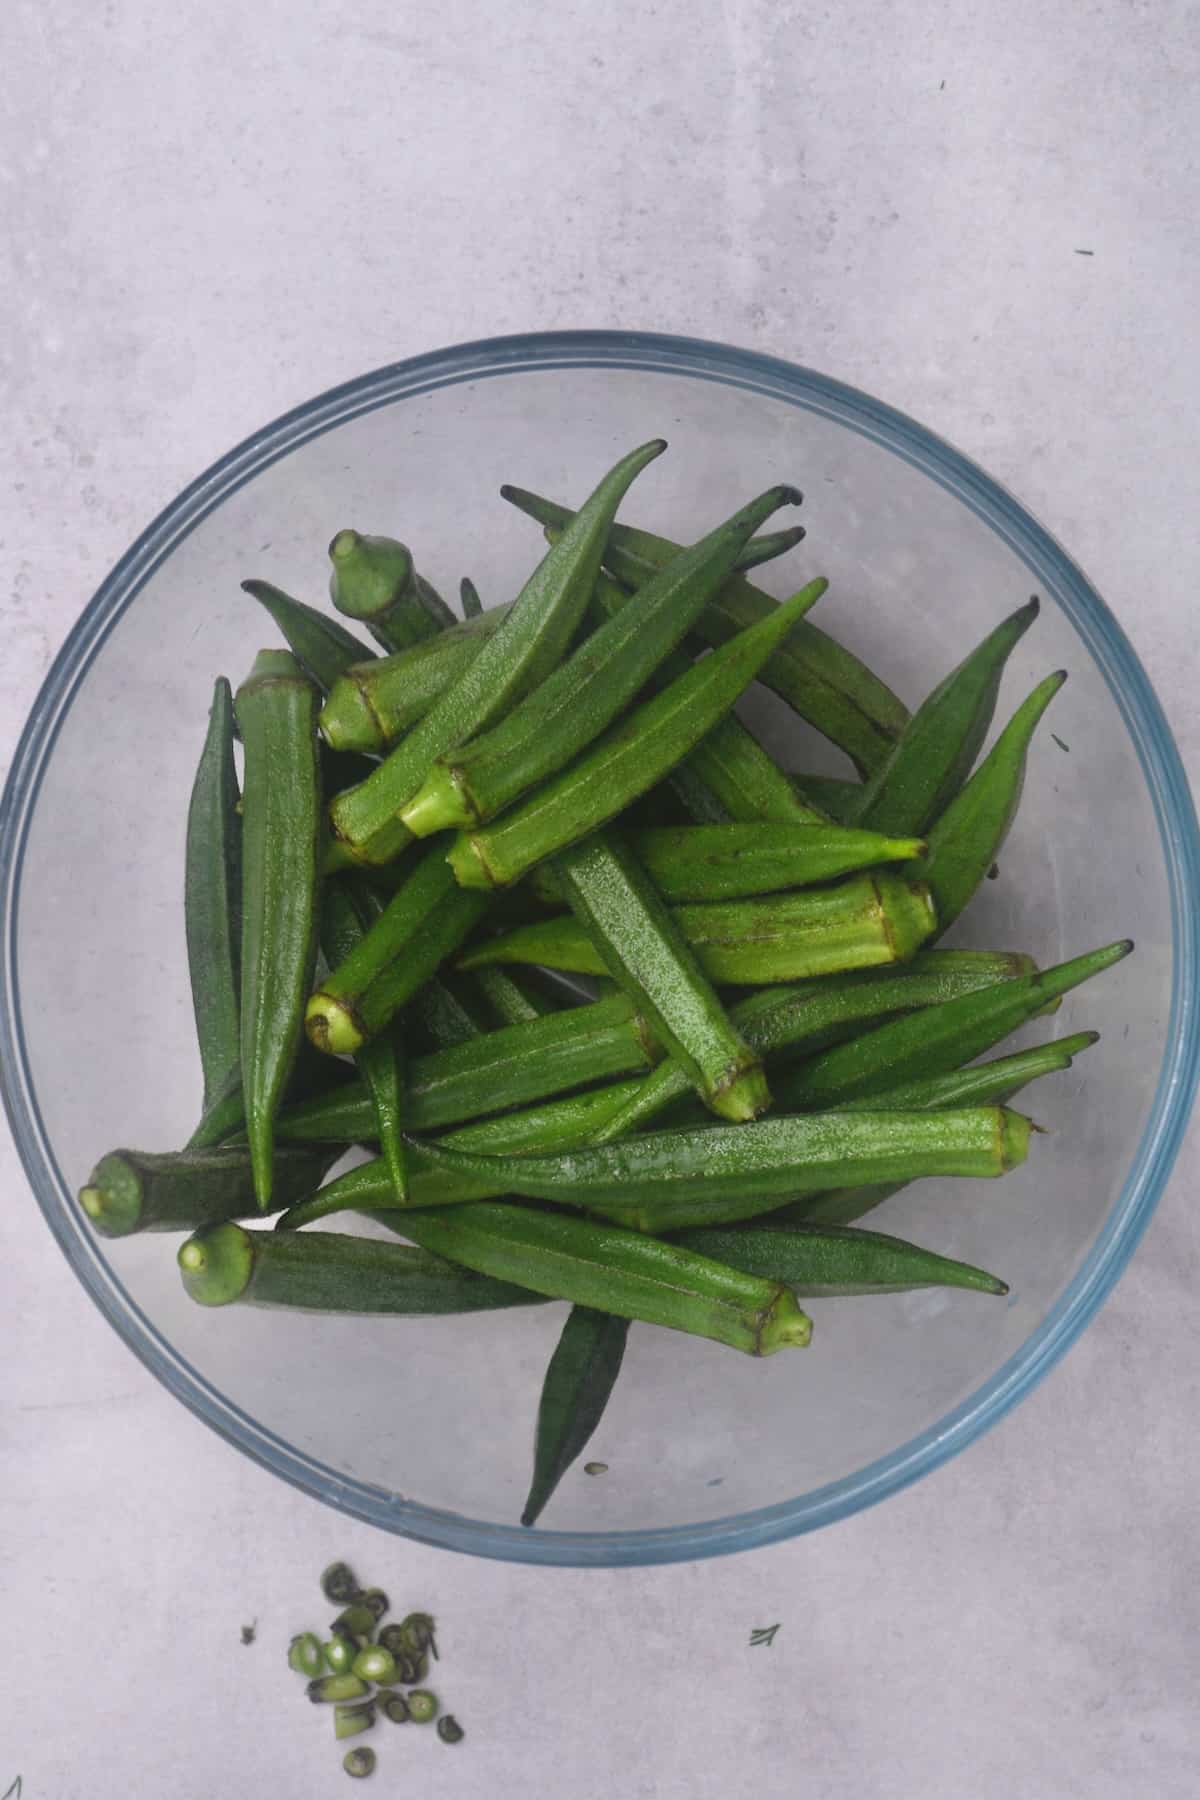 Washed okra in a bowl